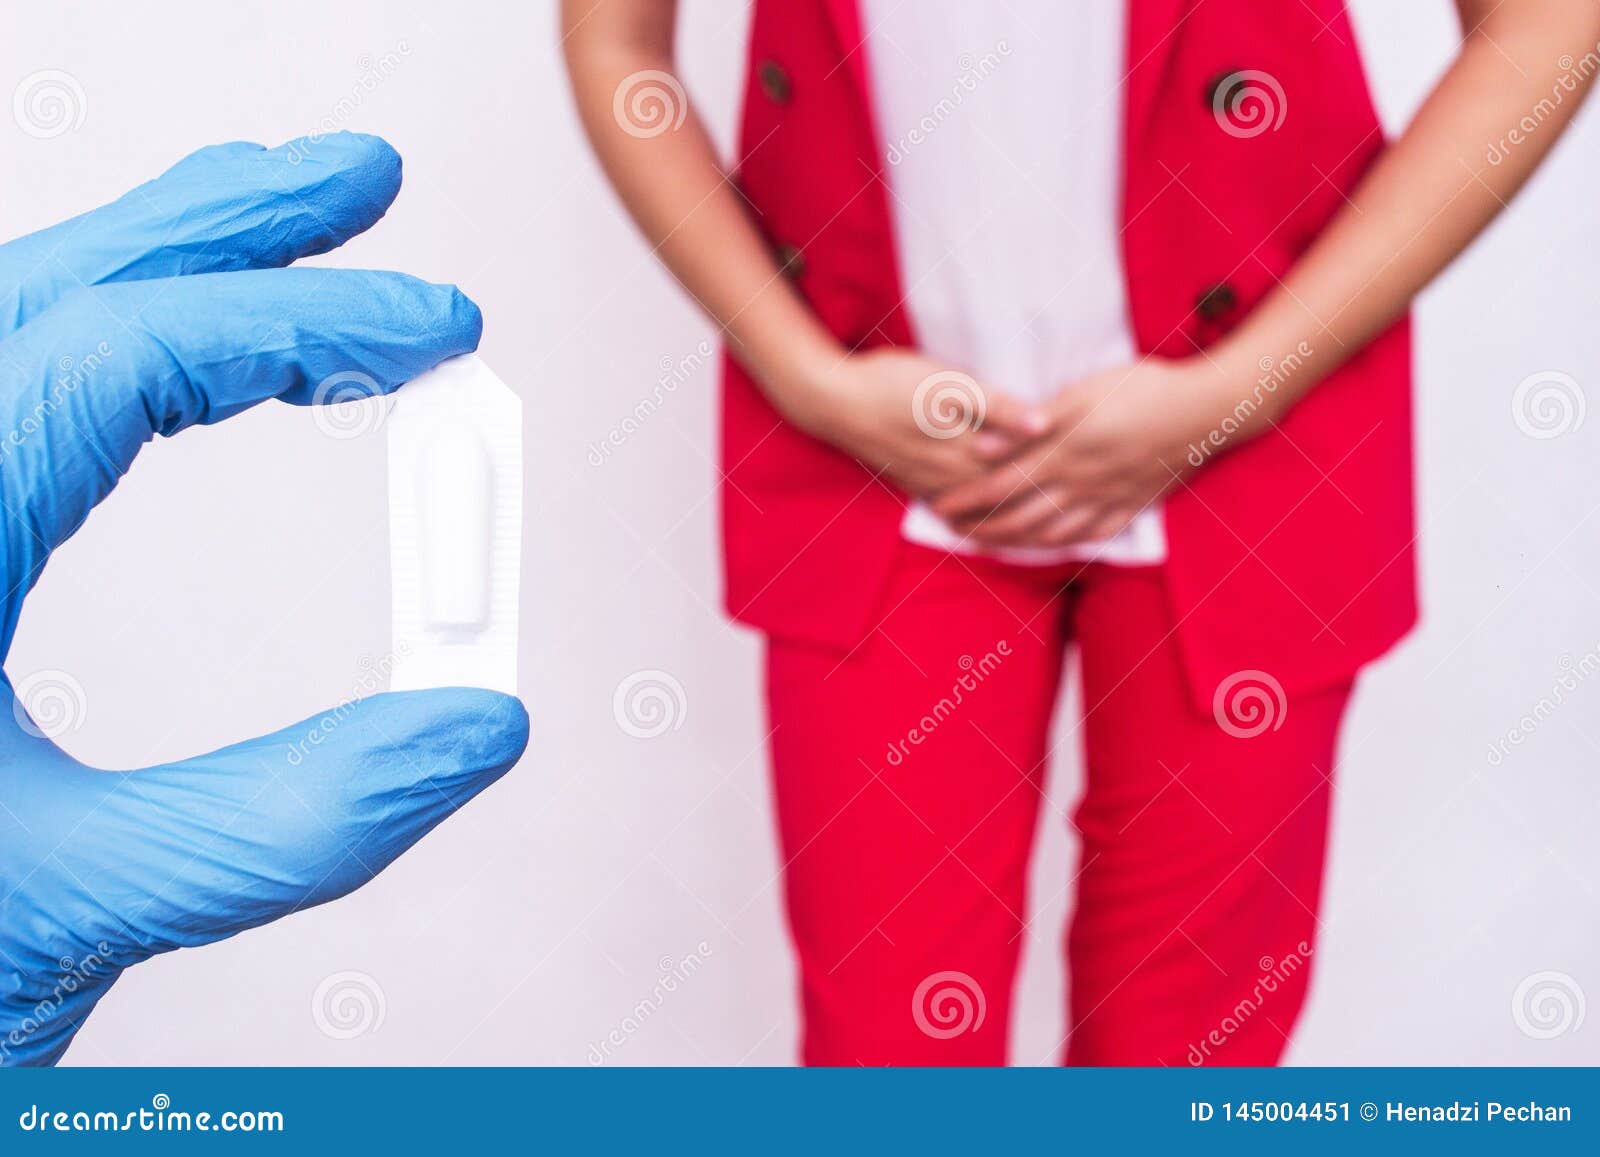 doctor holds vaginal suppository suppository against the background of a girl who has pain and inflammation, urological infections